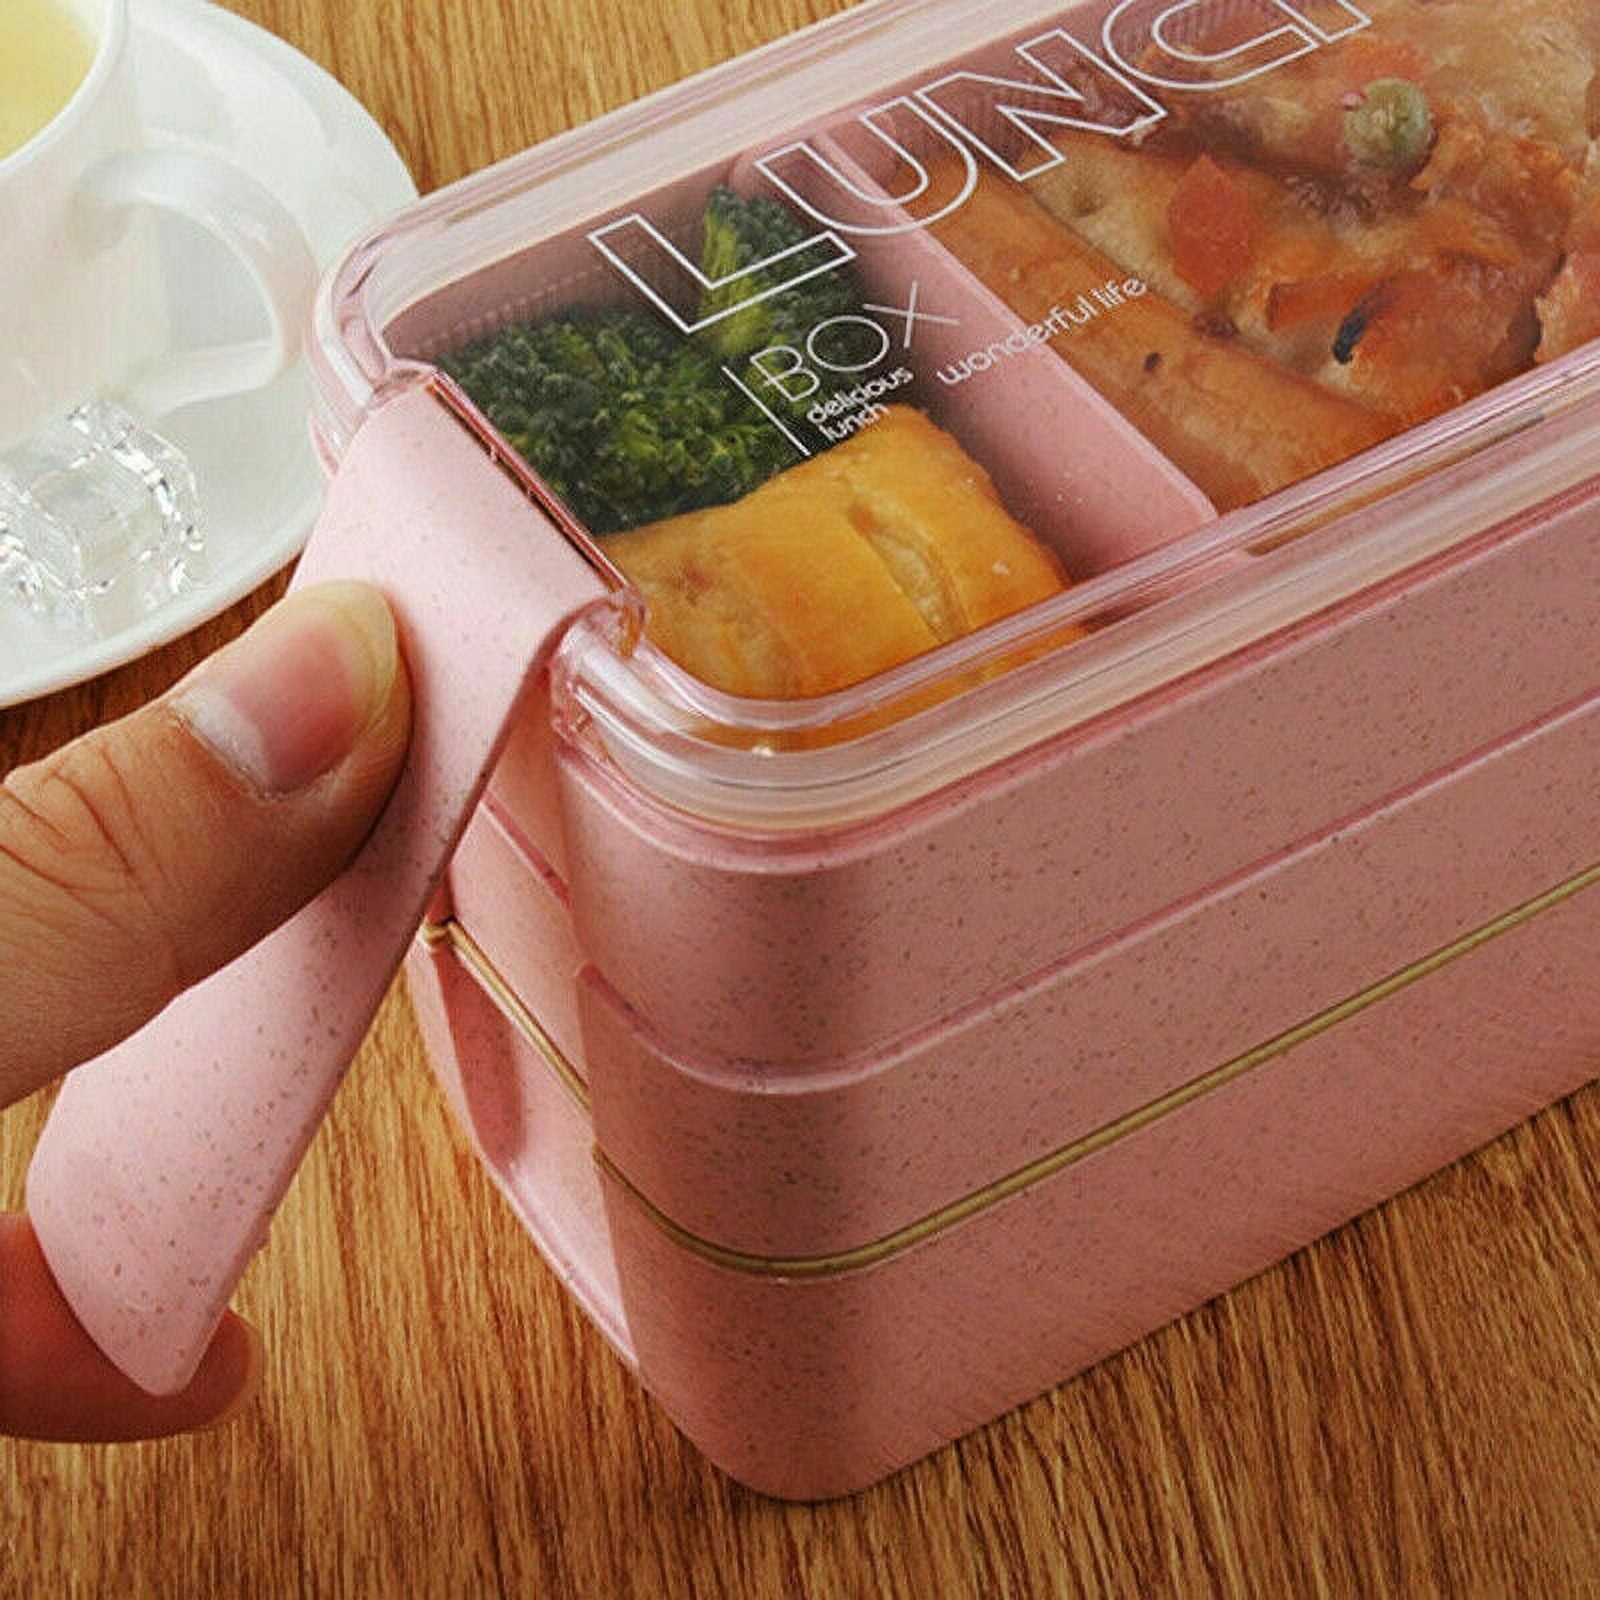 Original Bento Box Lunch Box Japanese Style 2 Layer Food Containers with  Utensils Spoon and Fork Bun…See more Original Bento Box Lunch Box Japanese